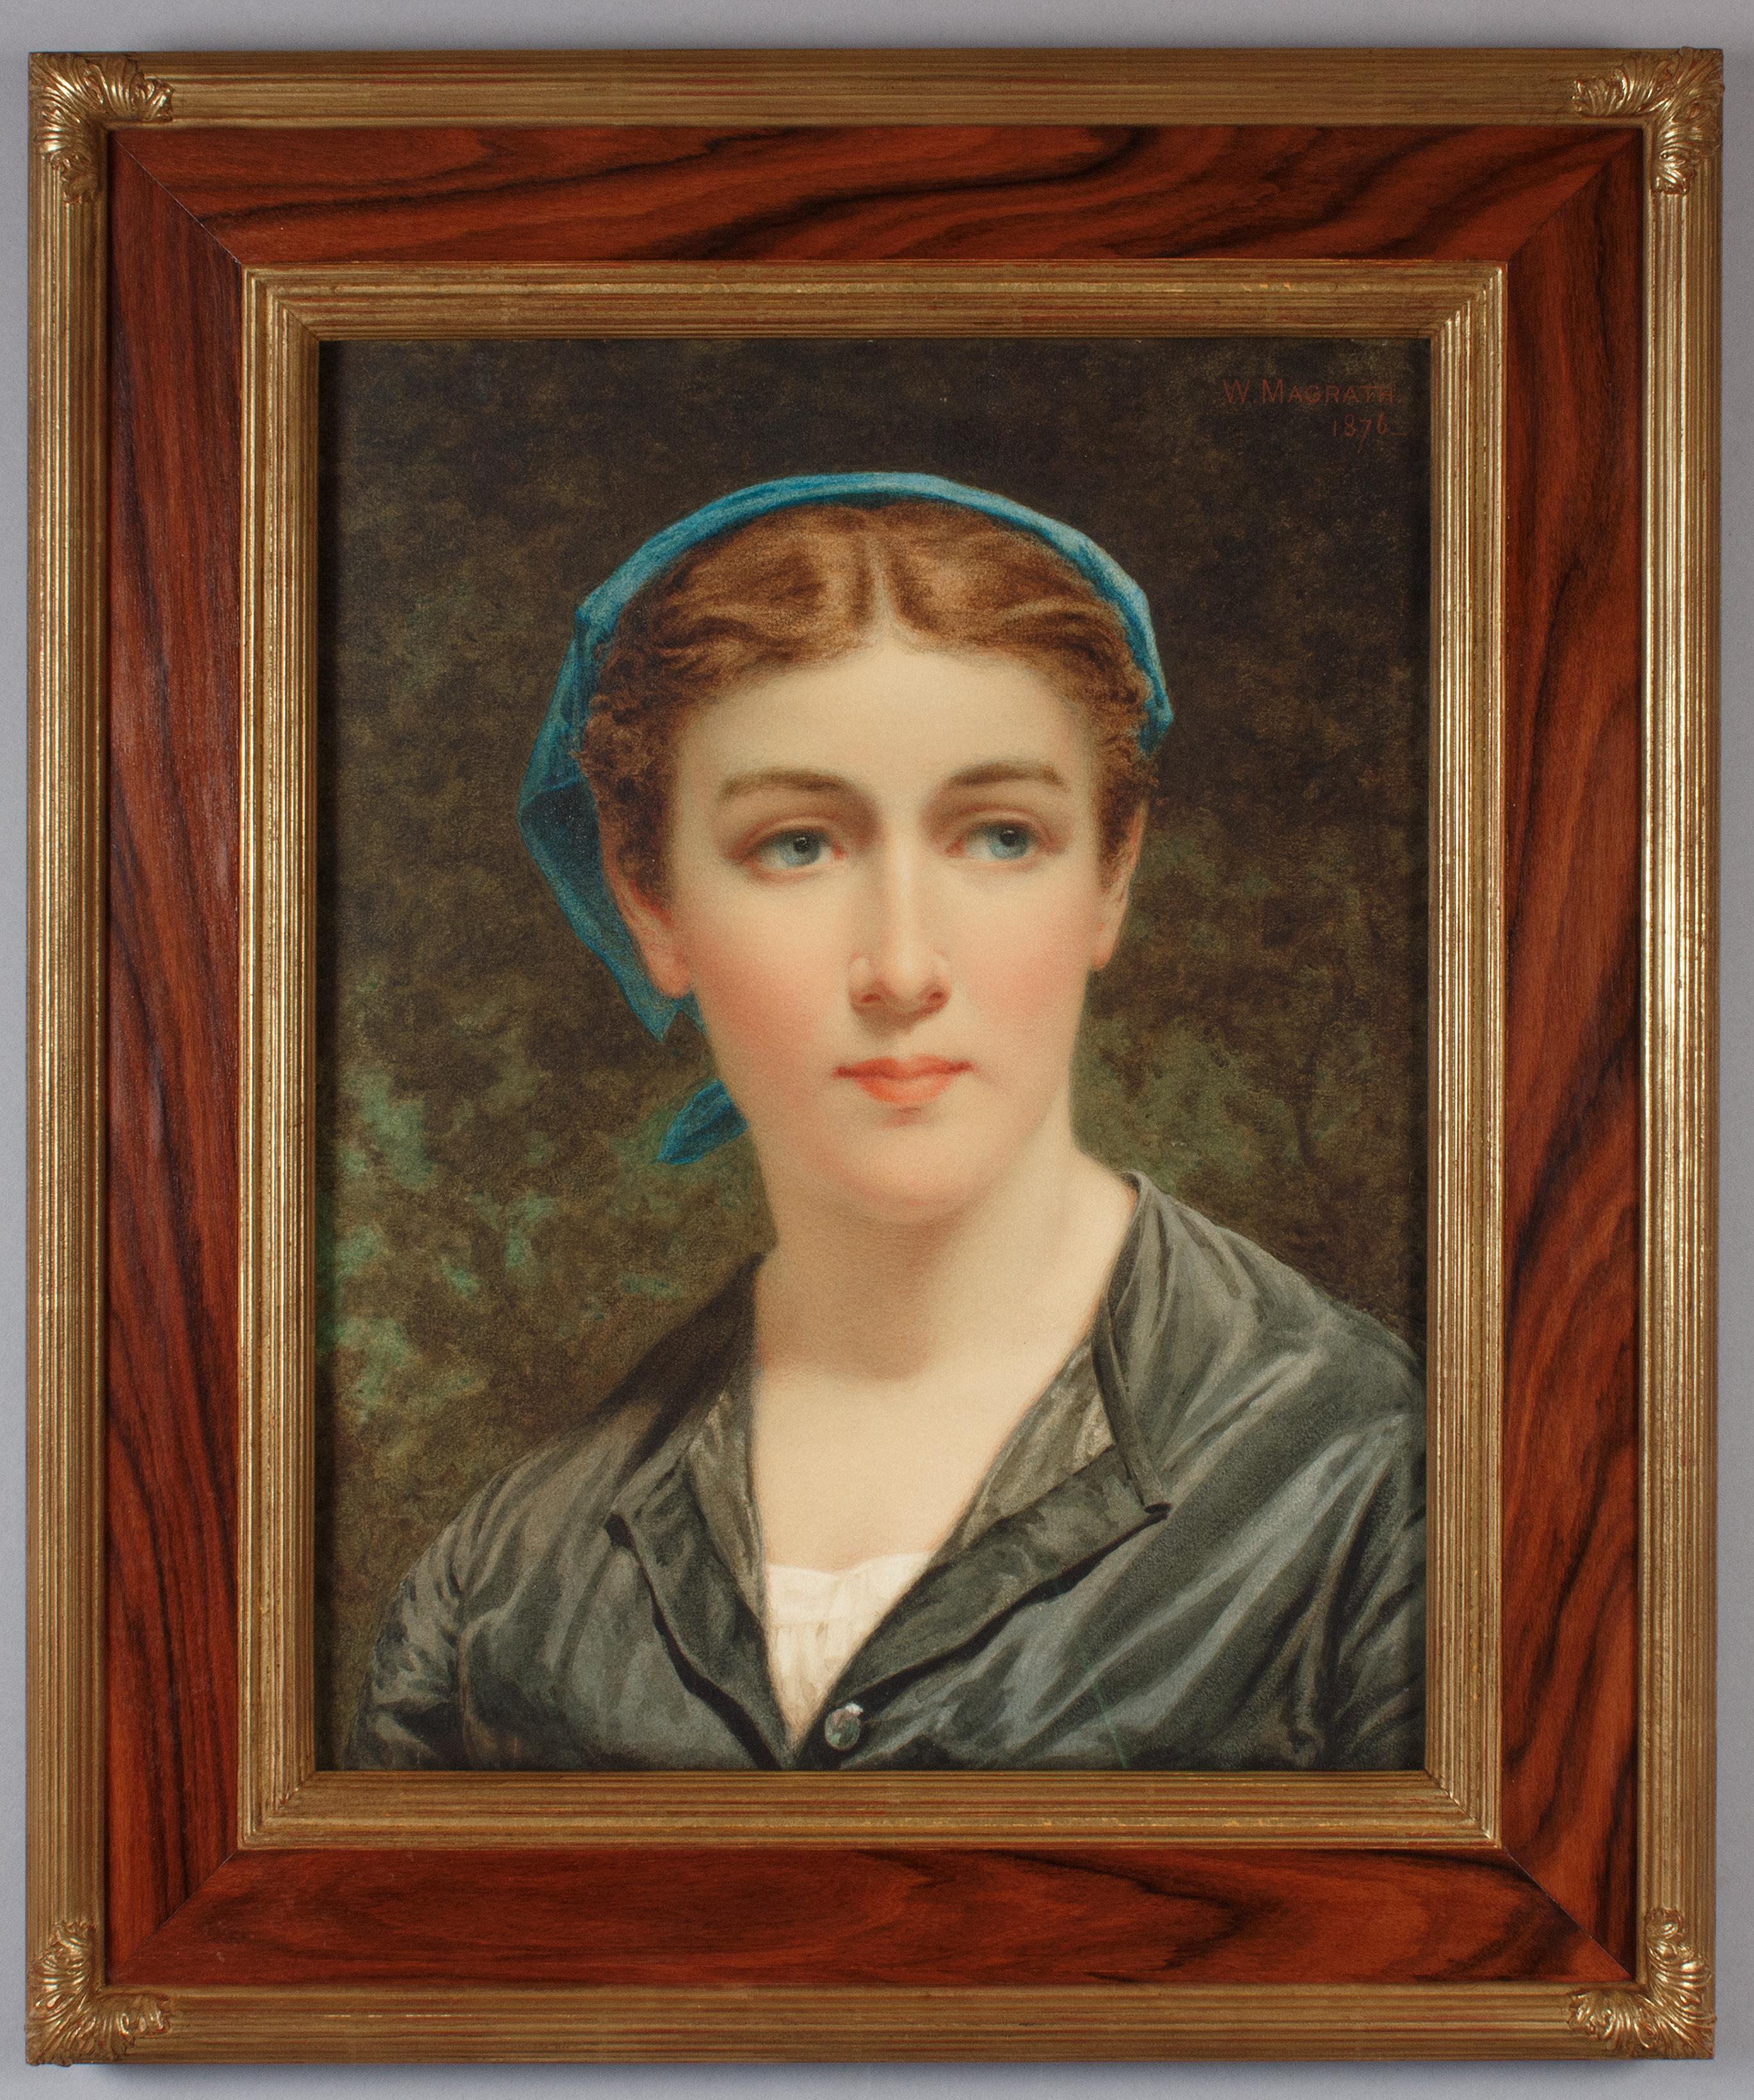 William Magrath Portrait - Woman with a Blue Kerchief: watercolor by Irish artist Magrath